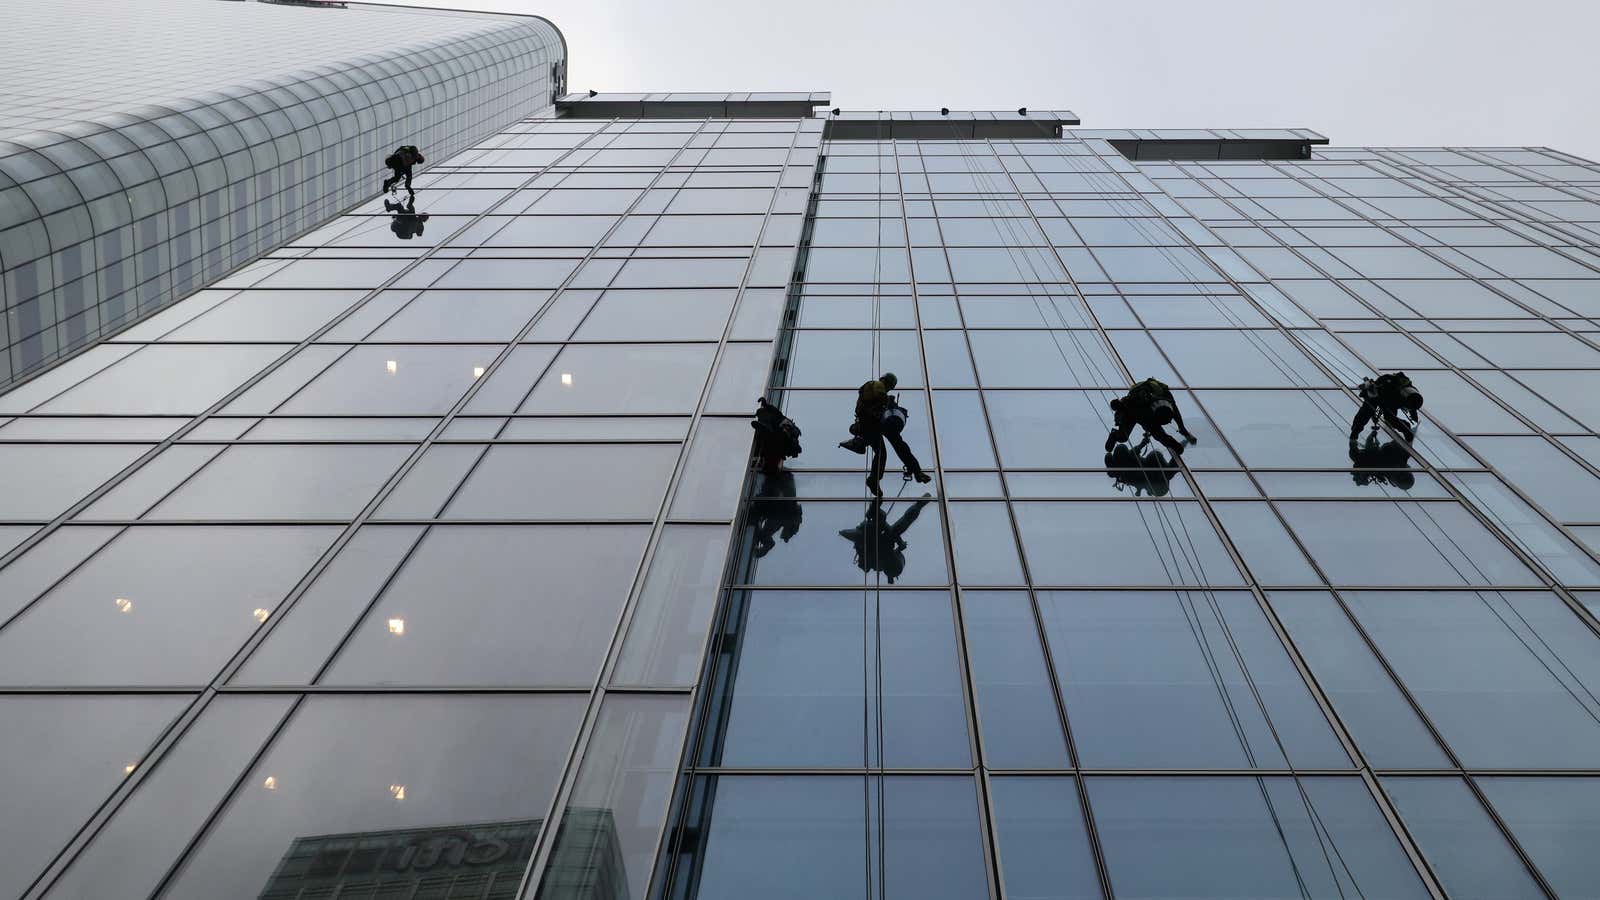 Workers clean the windows of KPMG, which has the worst failure rate of the Big Four: 50% in 2017